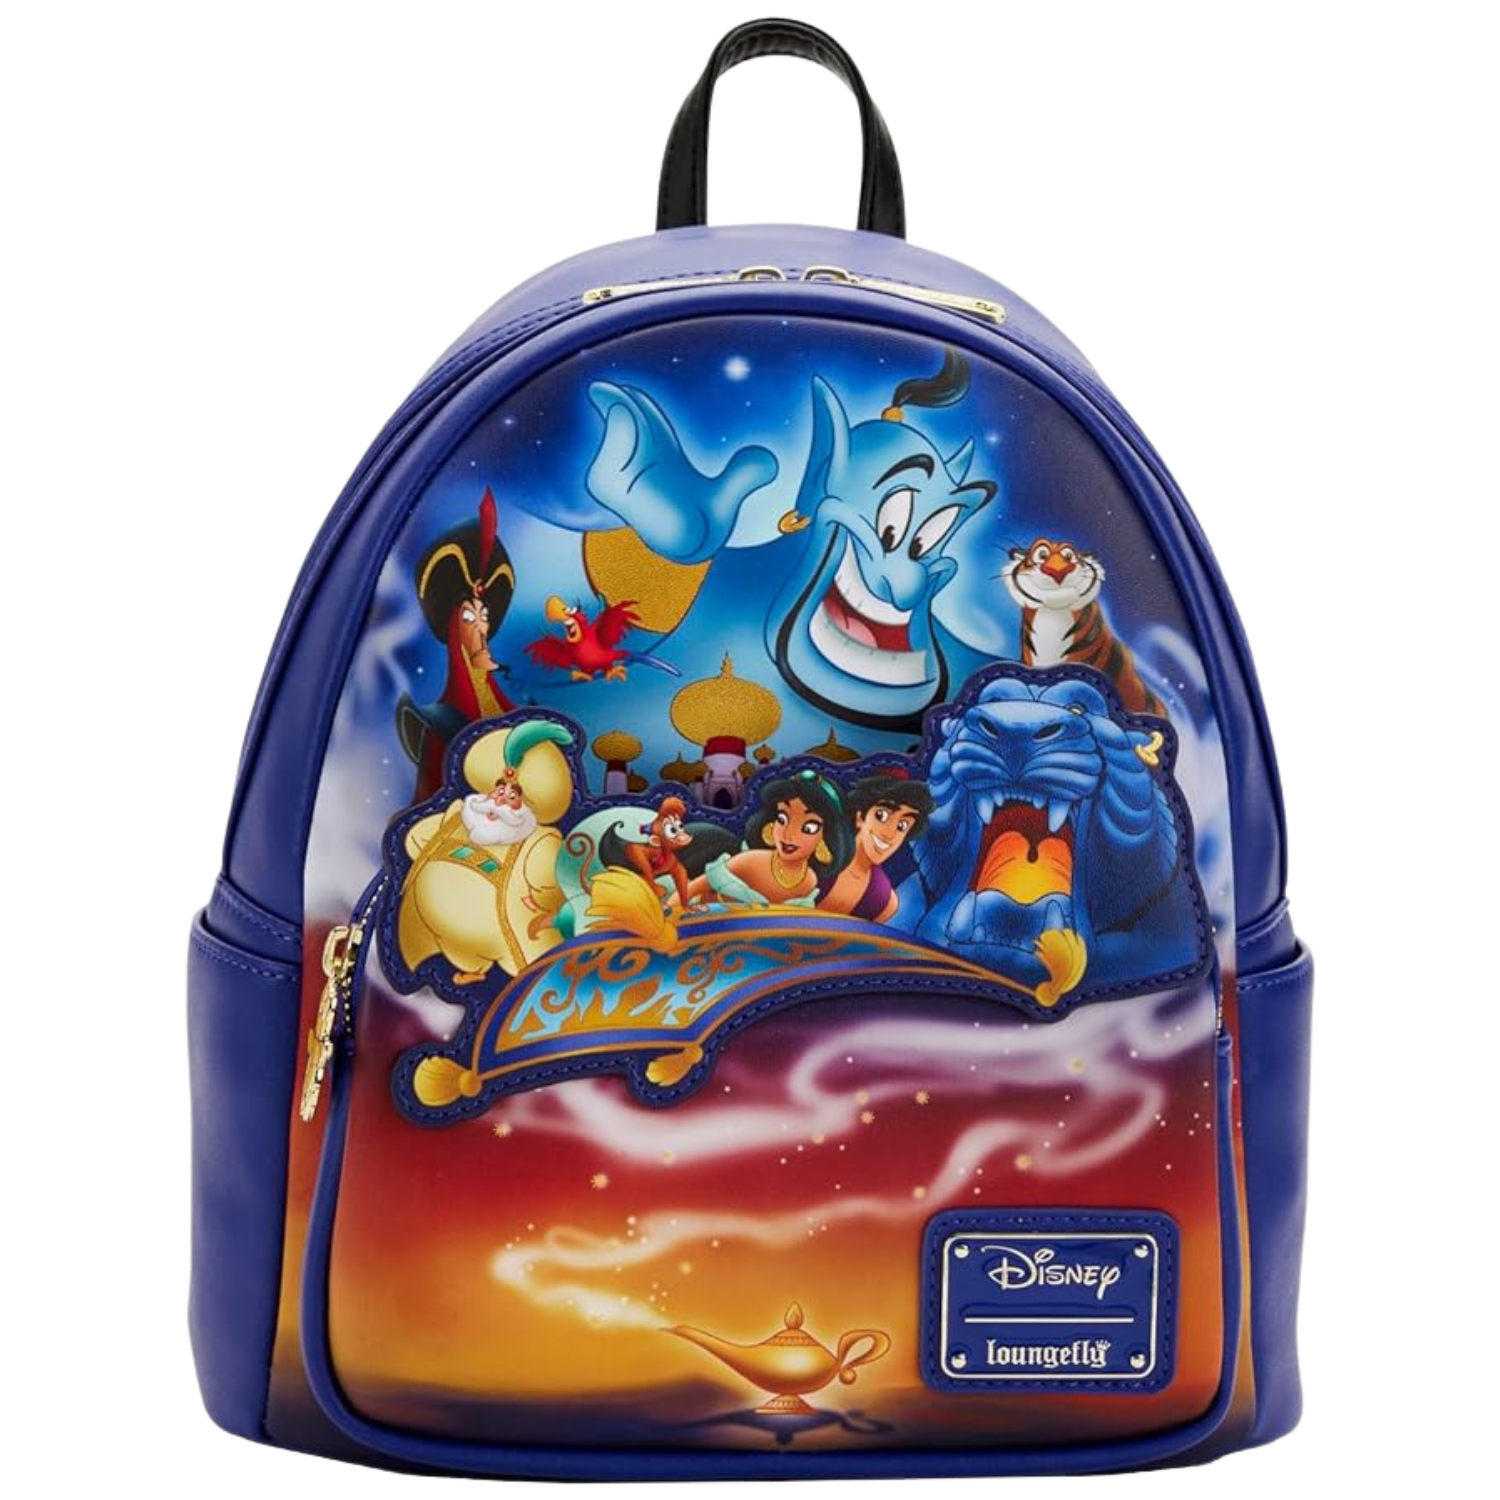 This image shows an Aladdin themed backpack with the Genie on the front